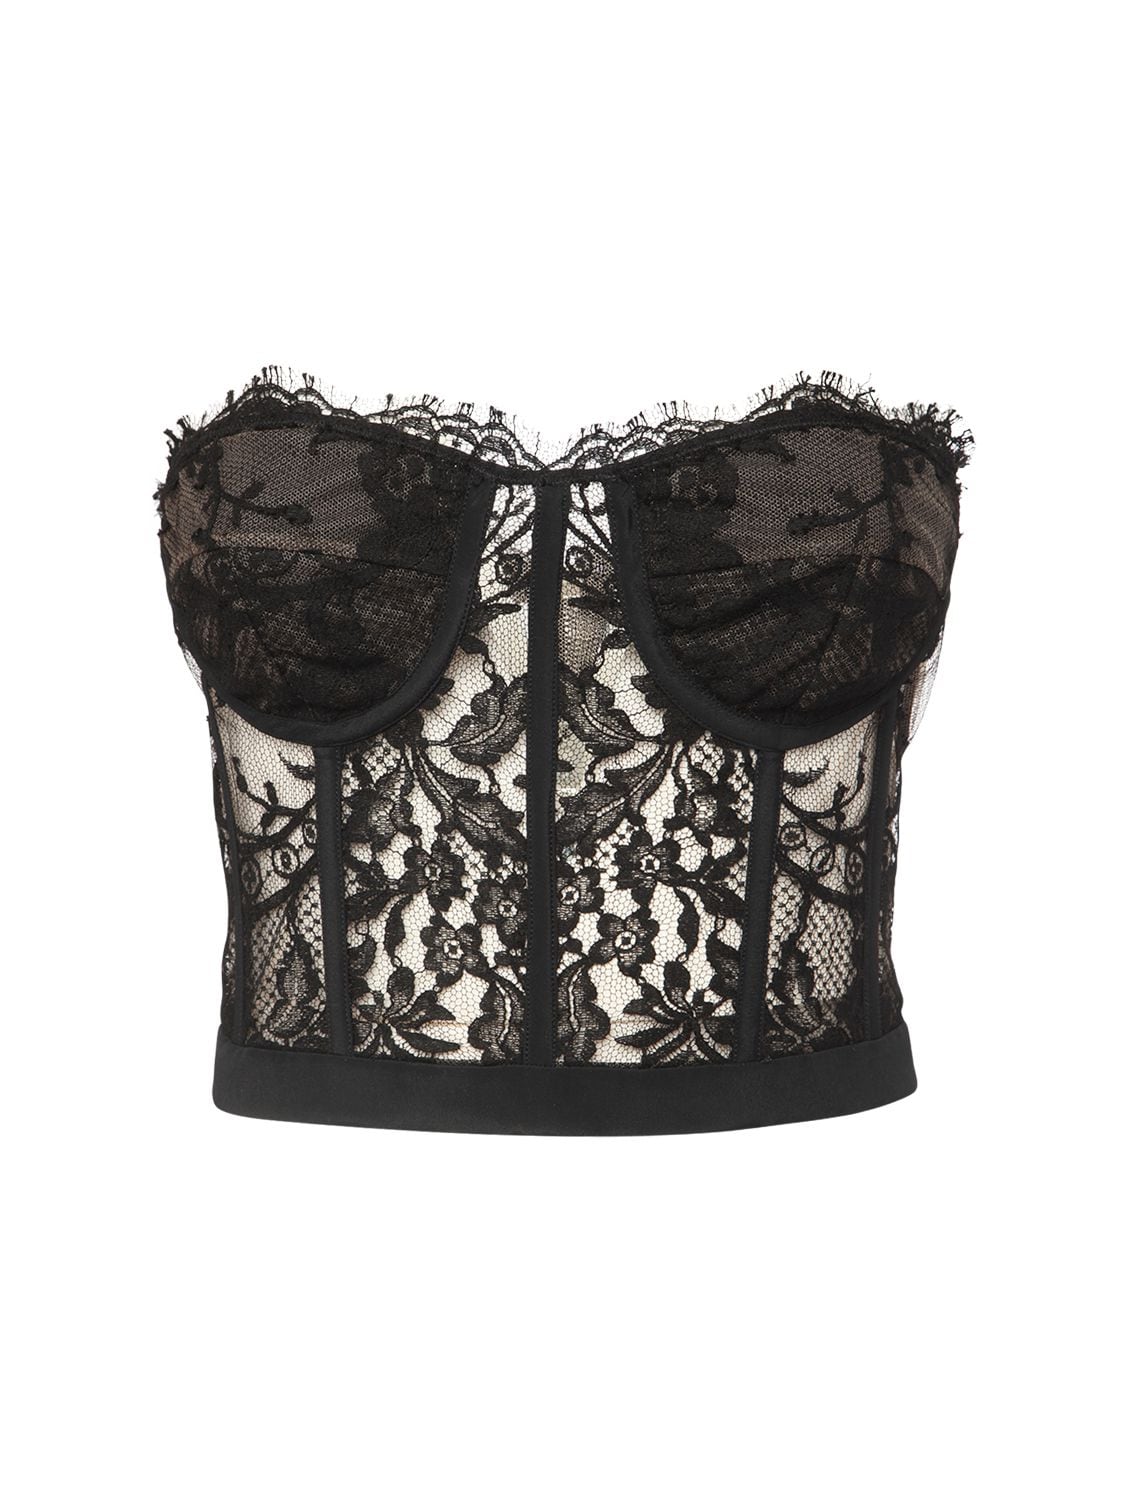 Strapless Lace Bustier Top